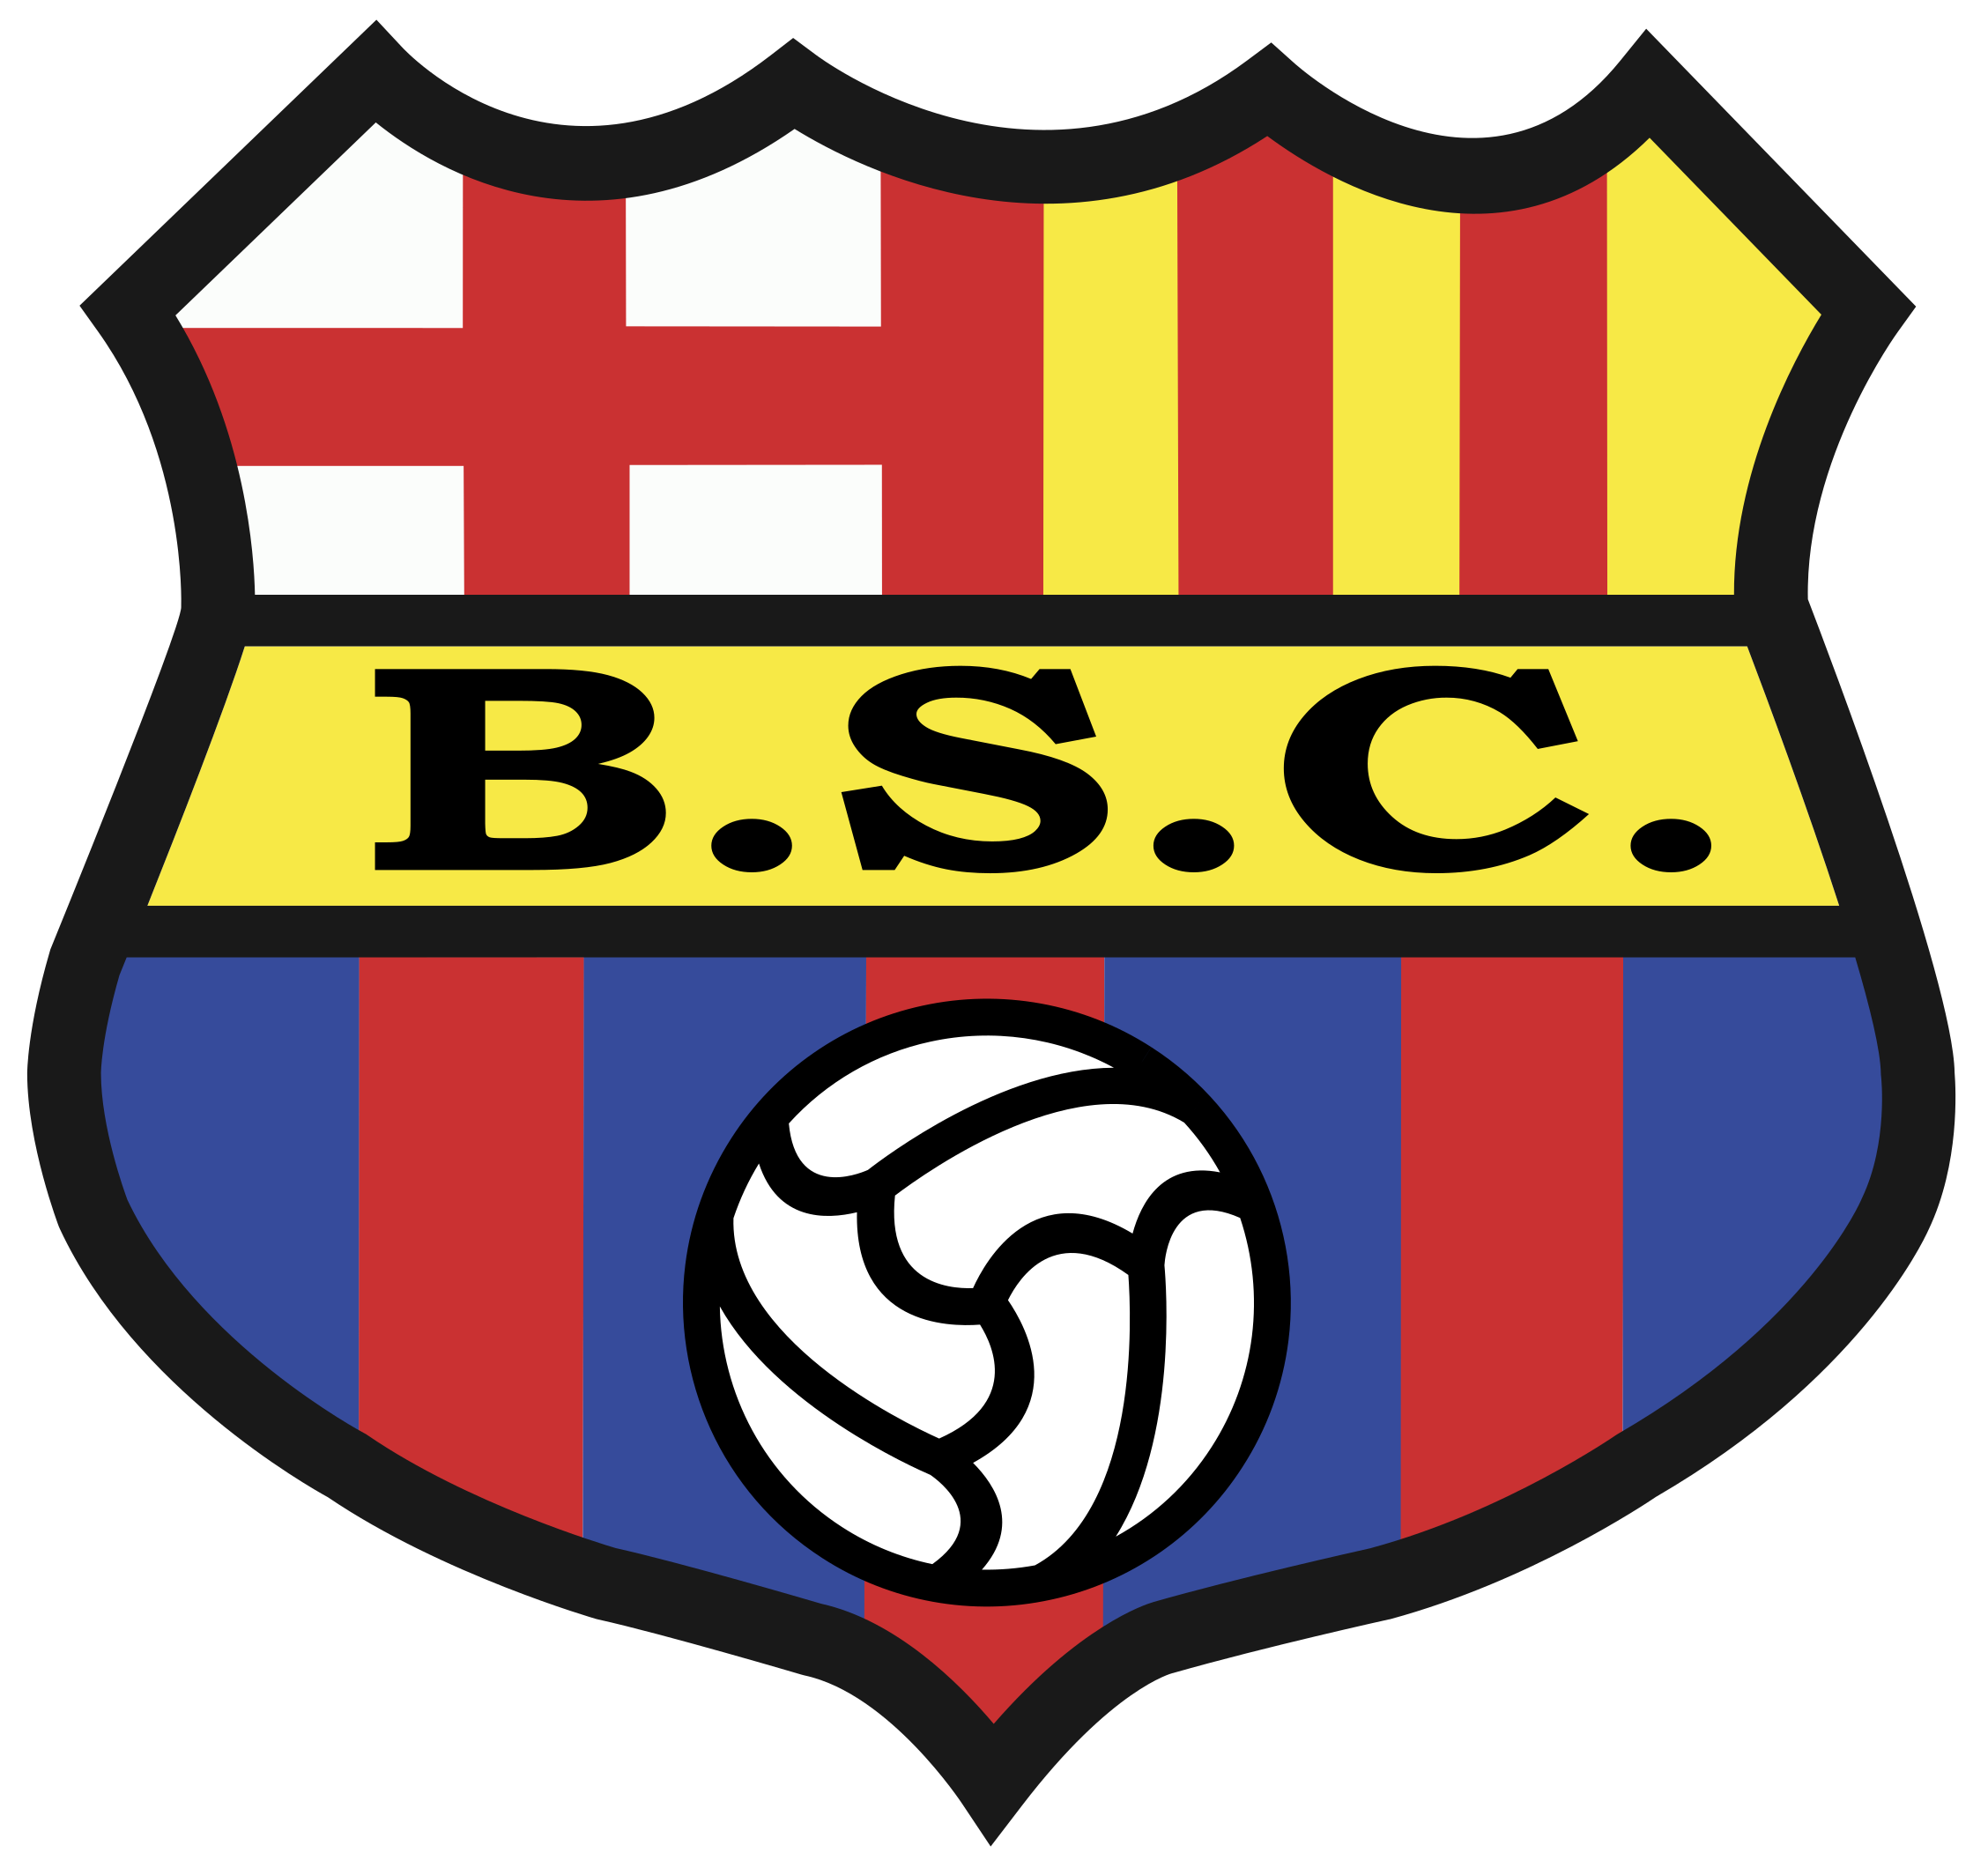 São Paulo vs Barcelona SC Prediction: The Paulistas want to finish at the top of their group